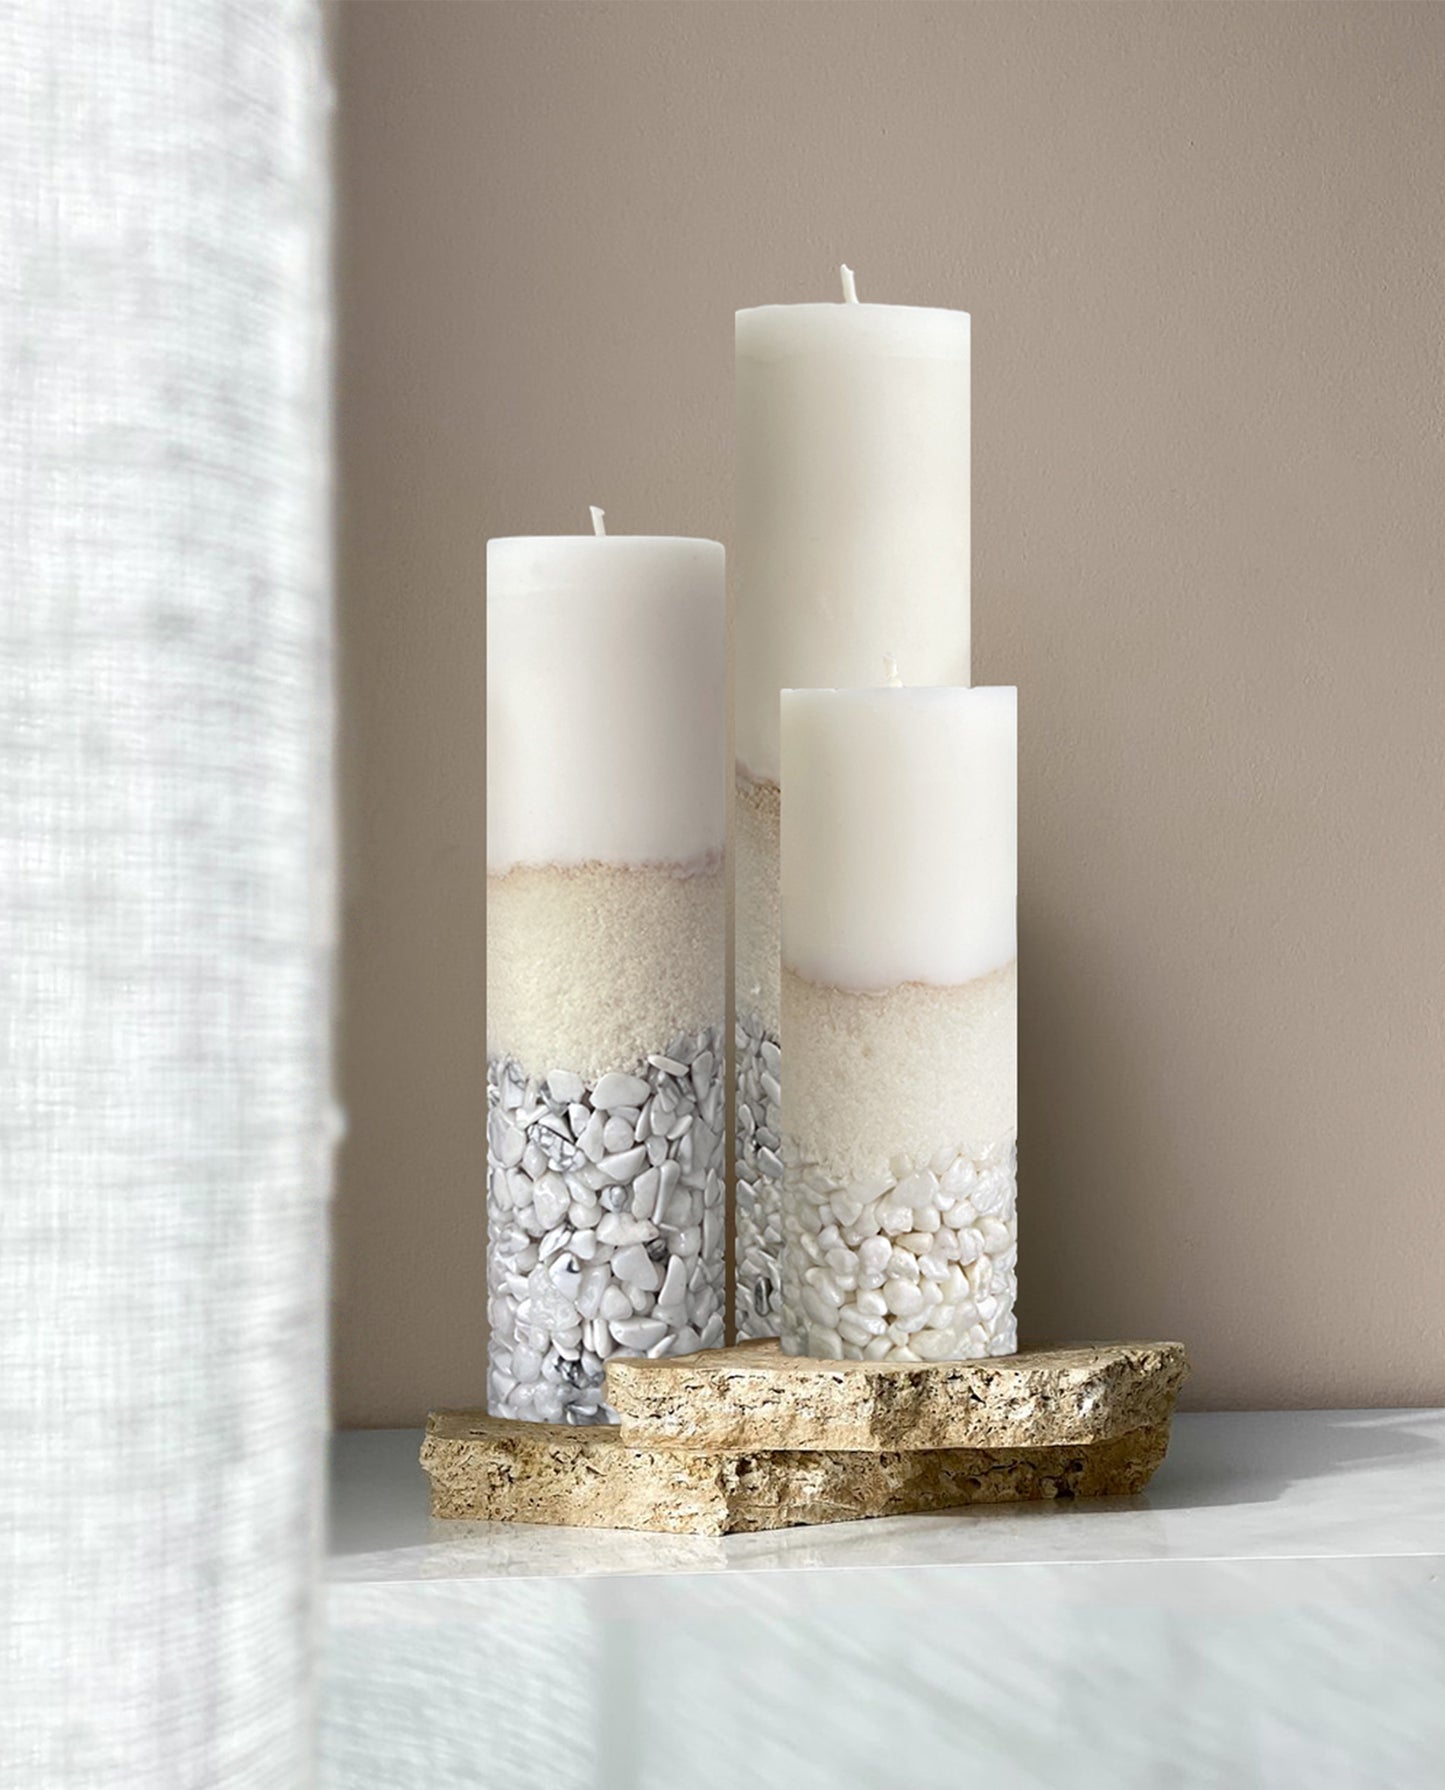 Three Different Size Candles of Howlite Crystals Displayed on a Travertine Slabs Showing How To Insert This Decorative Item to Brings a Statment and Bold Look to Home Decor.